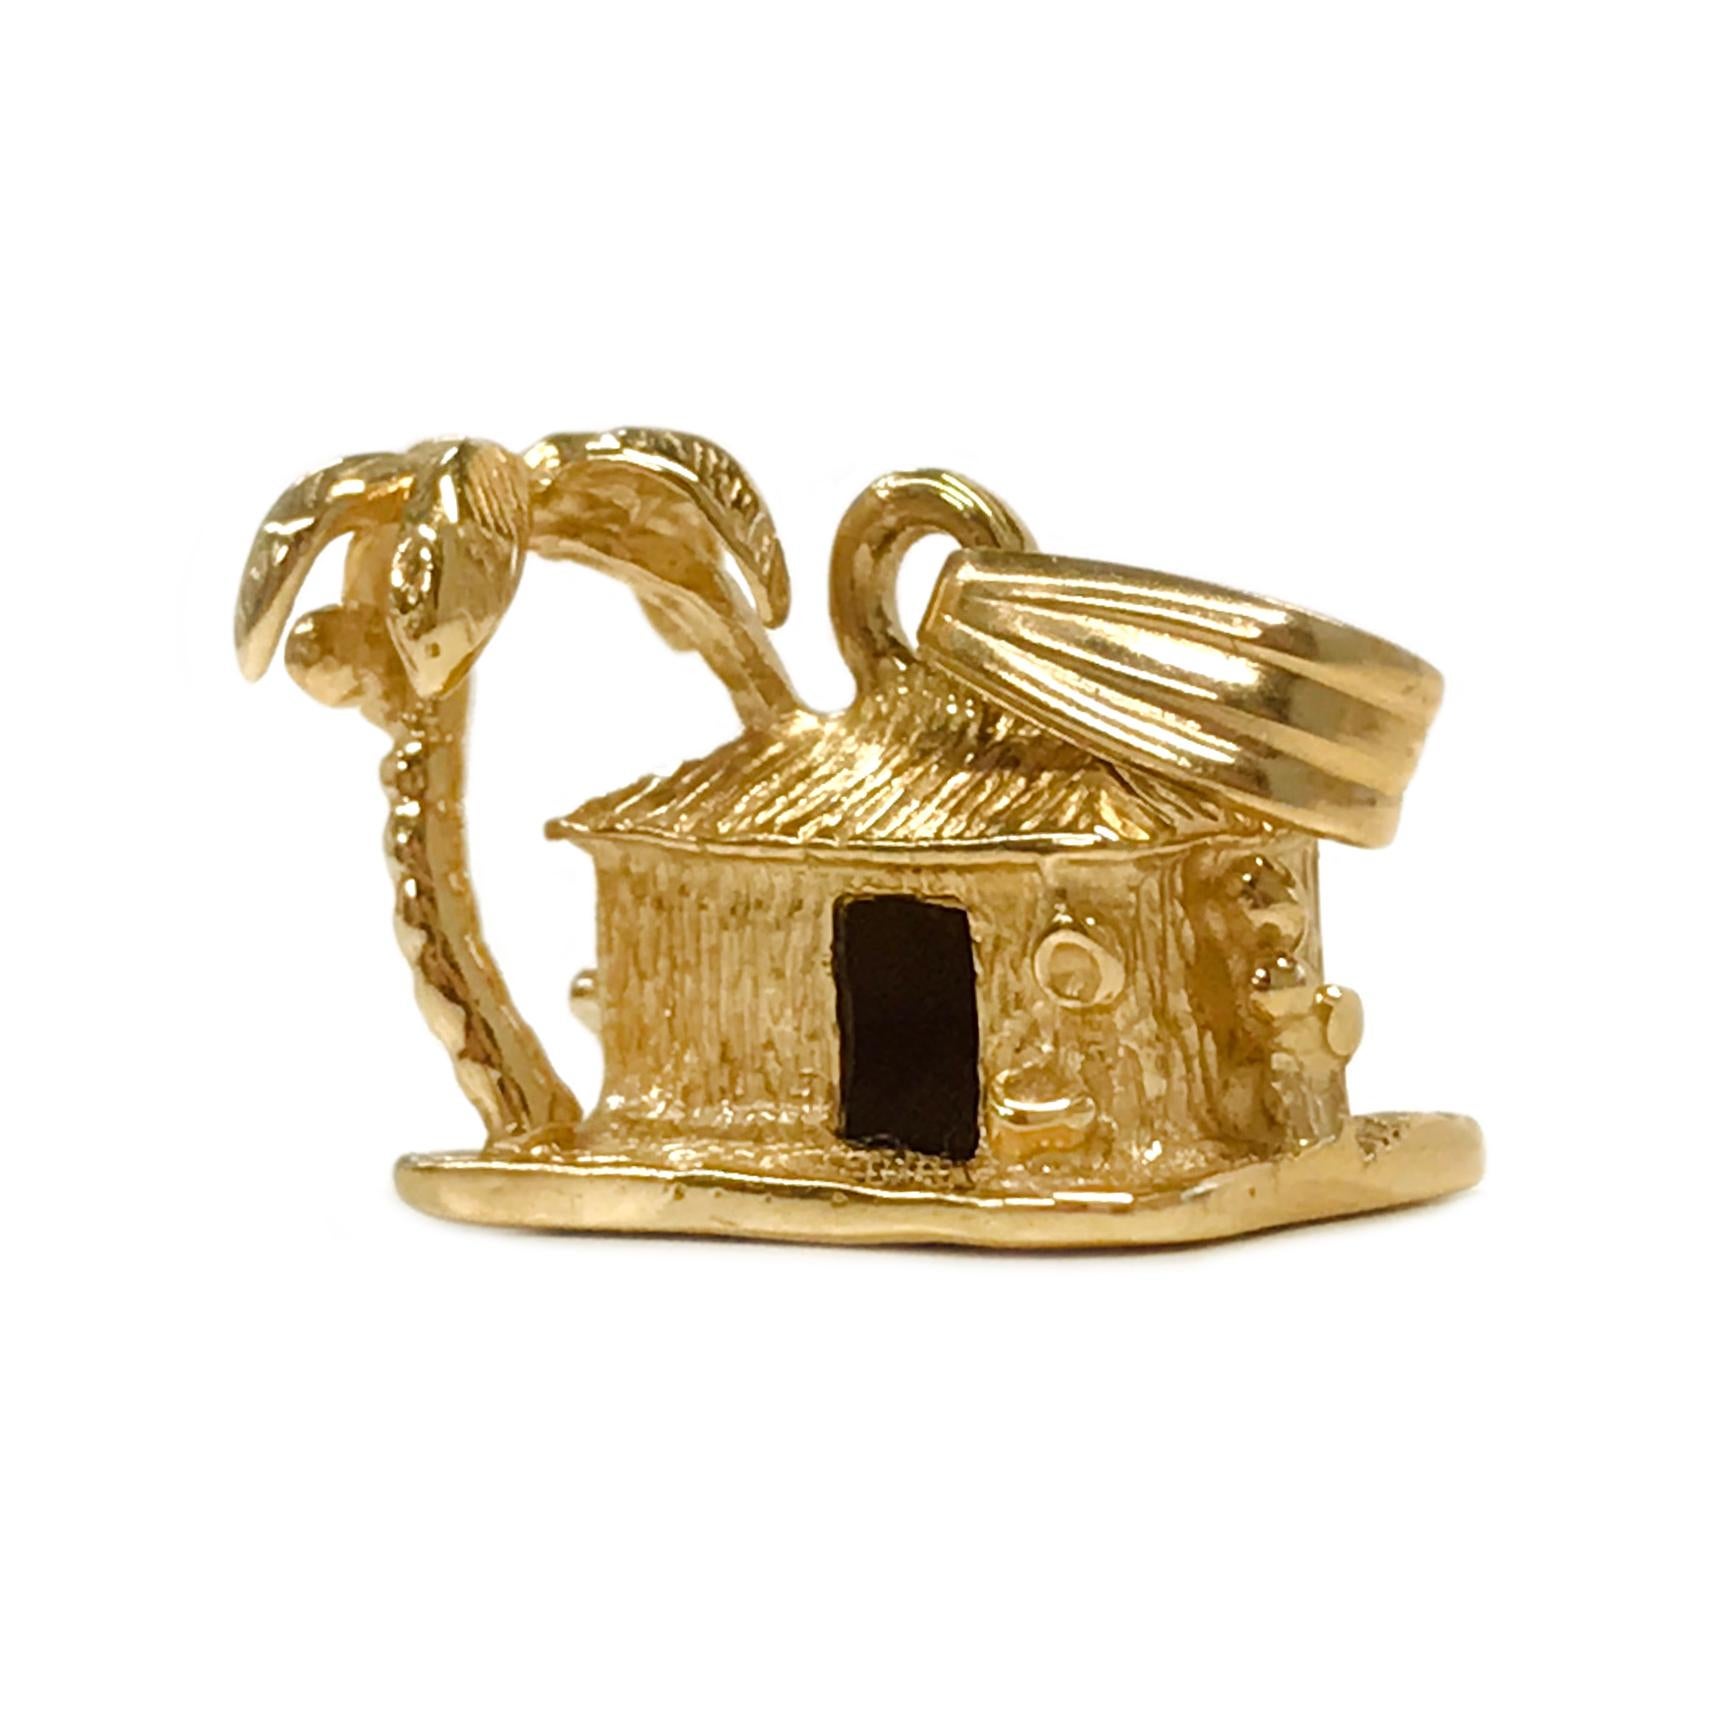 Absolutely adorable 14 Karat Yellow Gold Island Hut with Palm Tree Pendant. The pendant has texture on the hut and palm tree and measures 10.5mm tall x 14.6mm wide. Stamped on the bottom is the maker's mark (Crown with an S inside) and 14K. This